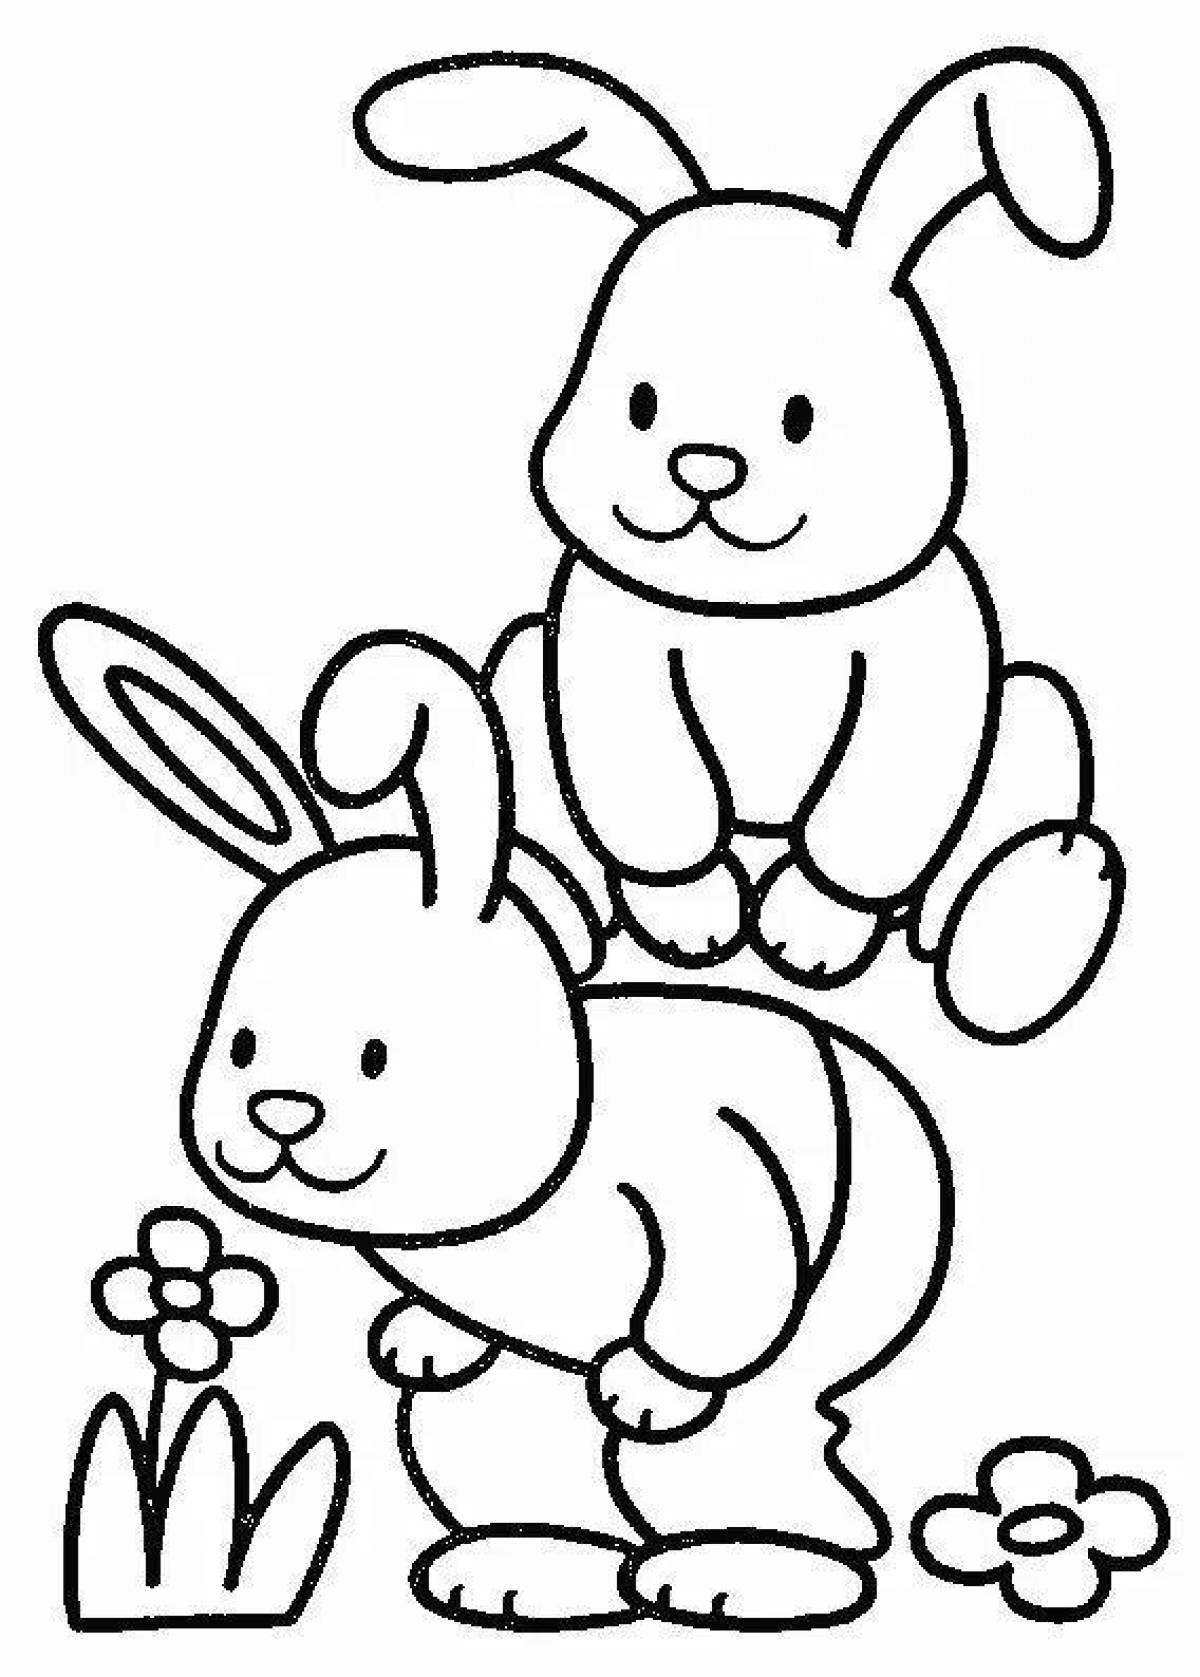 Coloring book magic hare for kids